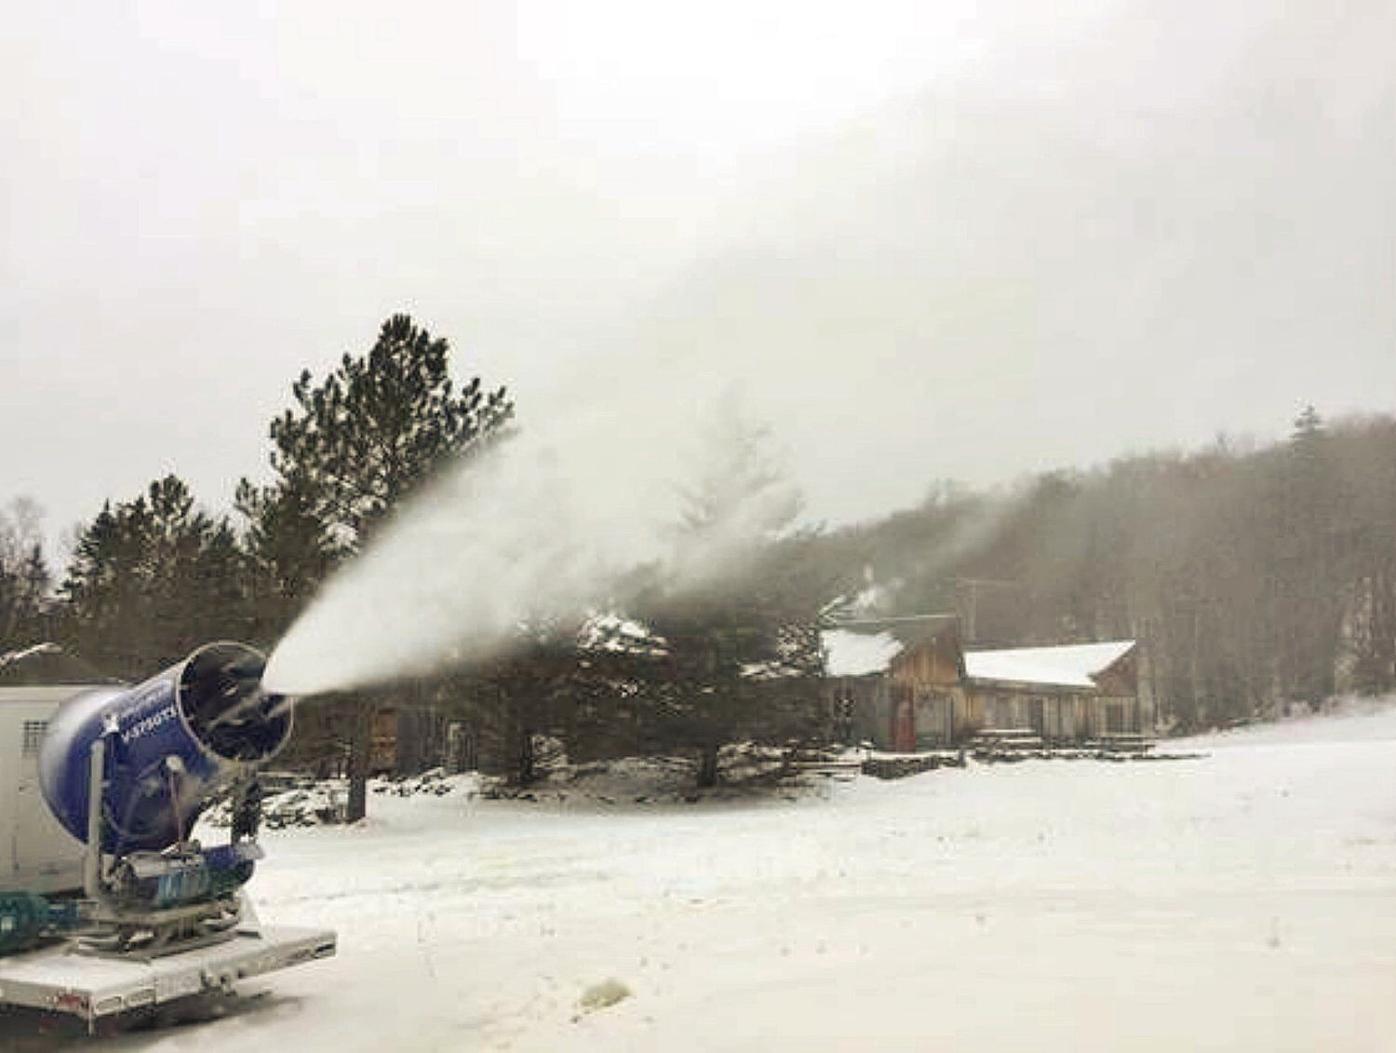 Snow-making project begins at Prospect Mountain